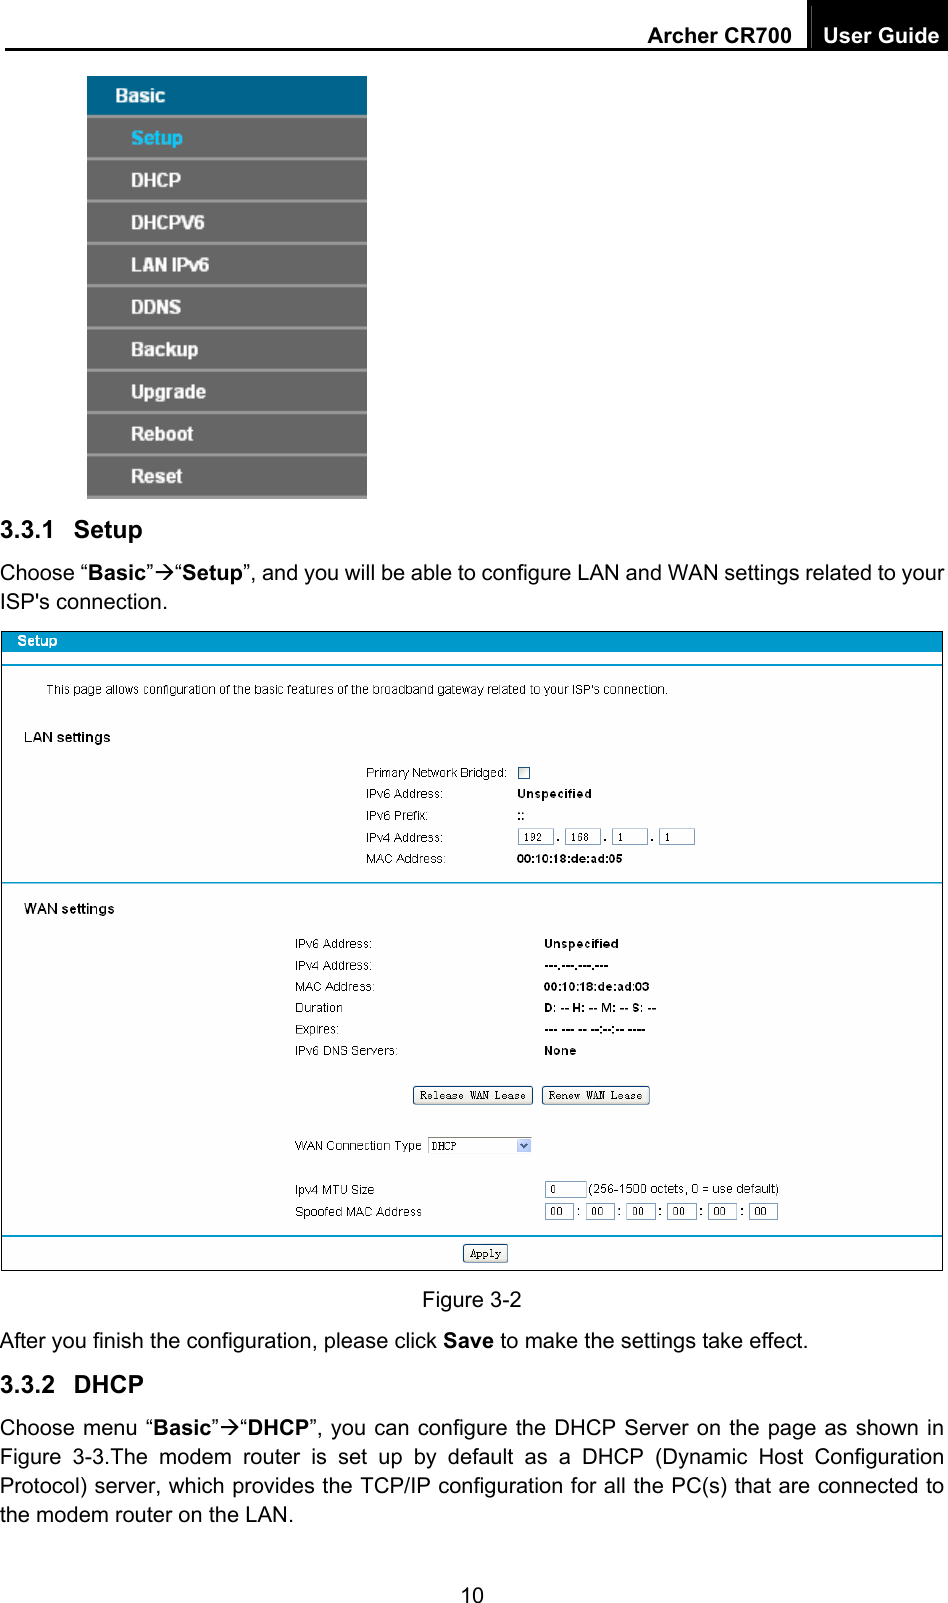 Archer CR700  User Guide 10  3.3.1  Setup Choose “Basic”Æ“Setup”, and you will be able to configure LAN and WAN settings related to your ISP&apos;s connection.    Figure 3-2 After you finish the configuration, please click Save to make the settings take effect. 3.3.2  DHCP Choose menu “Basic”Æ“DHCP”, you can configure the DHCP Server on the page as shown in Figure 3-3.The modem router is set up by default as a DHCP (Dynamic Host Configuration Protocol) server, which provides the TCP/IP configuration for all the PC(s) that are connected to the modem router on the LAN. 